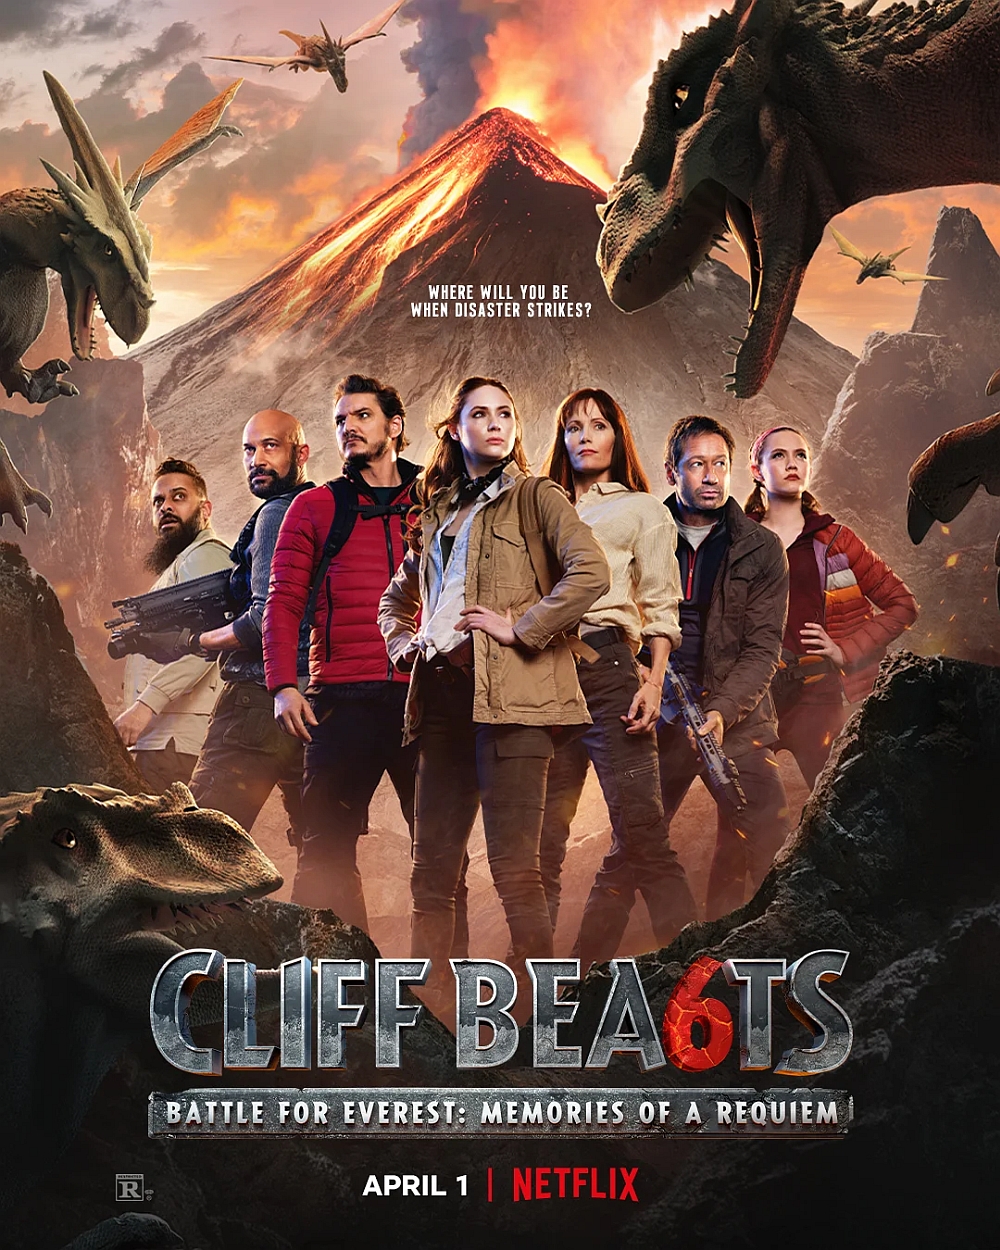 Cliff Beasts